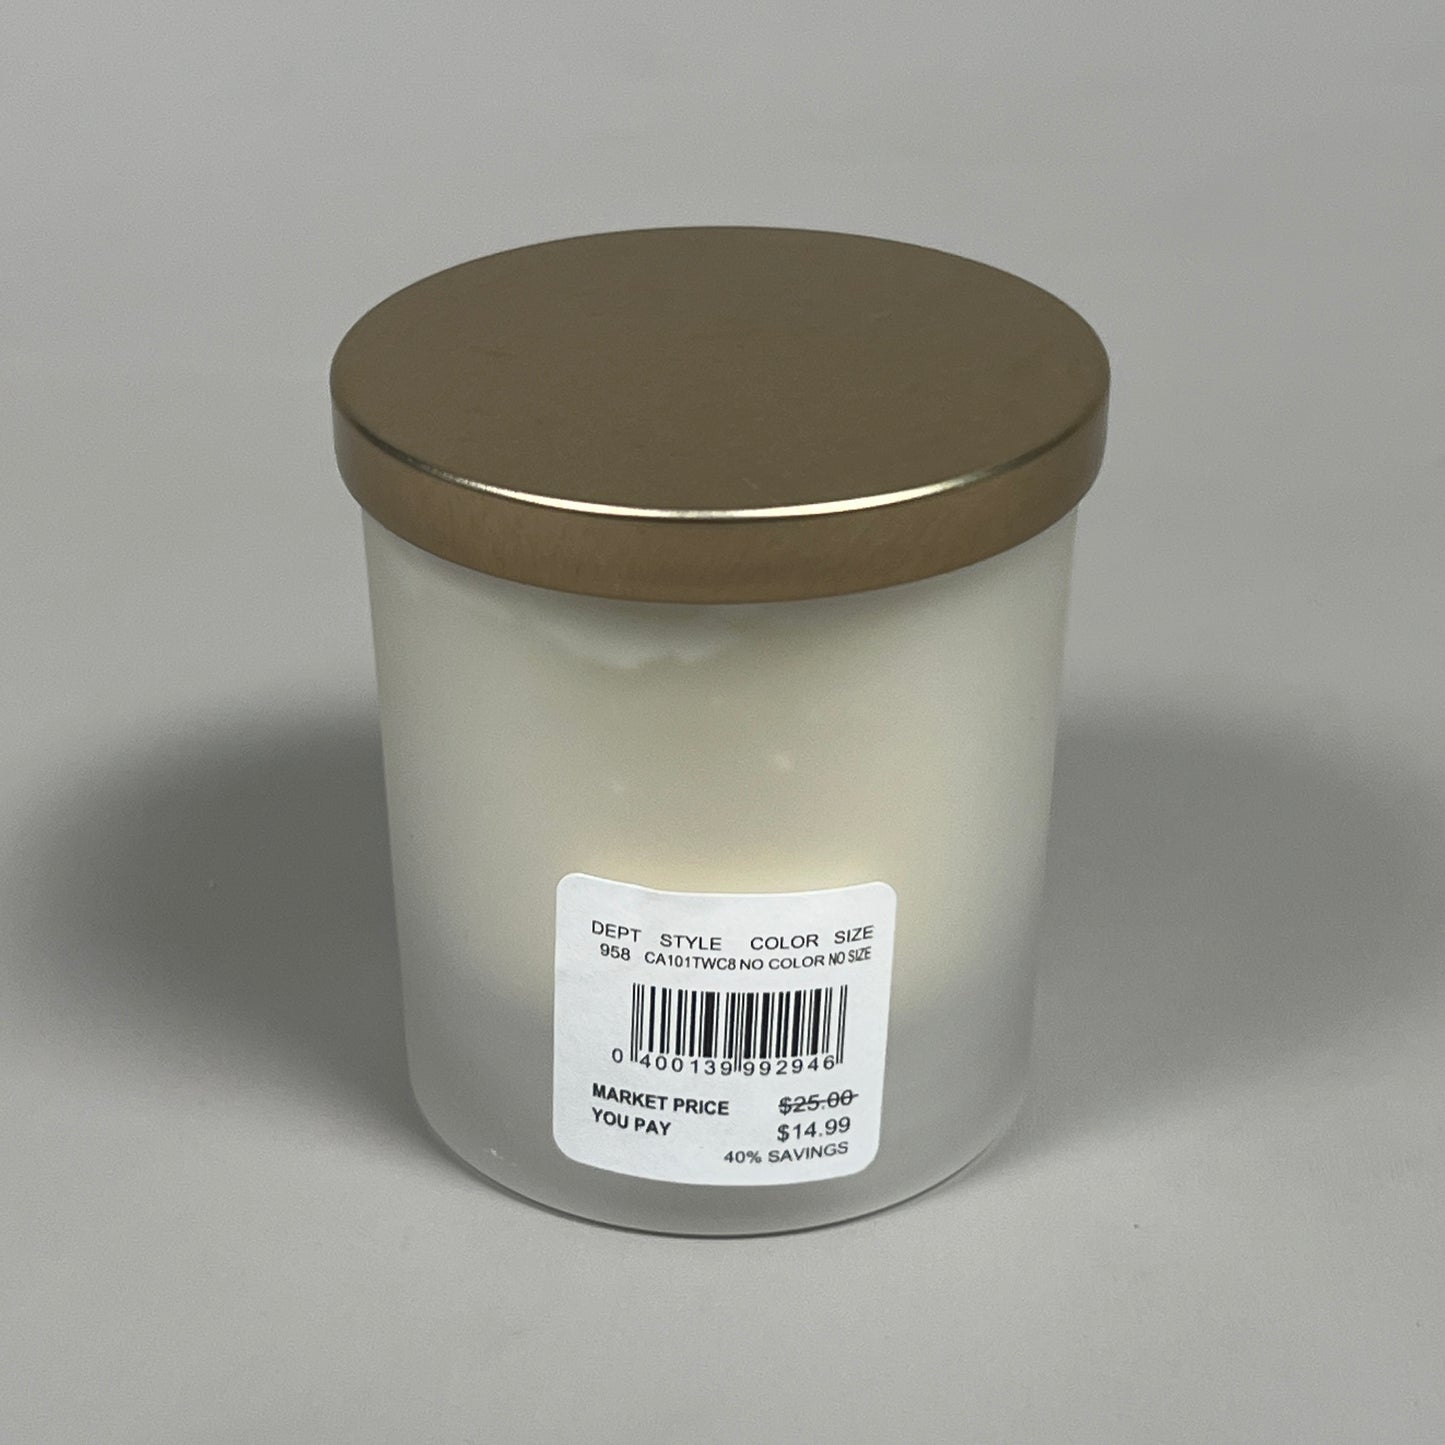 SAKS FIFTH AVENUE Twisted Coconut Hand Poured Soy Wax Candle 8 fl oz (New)